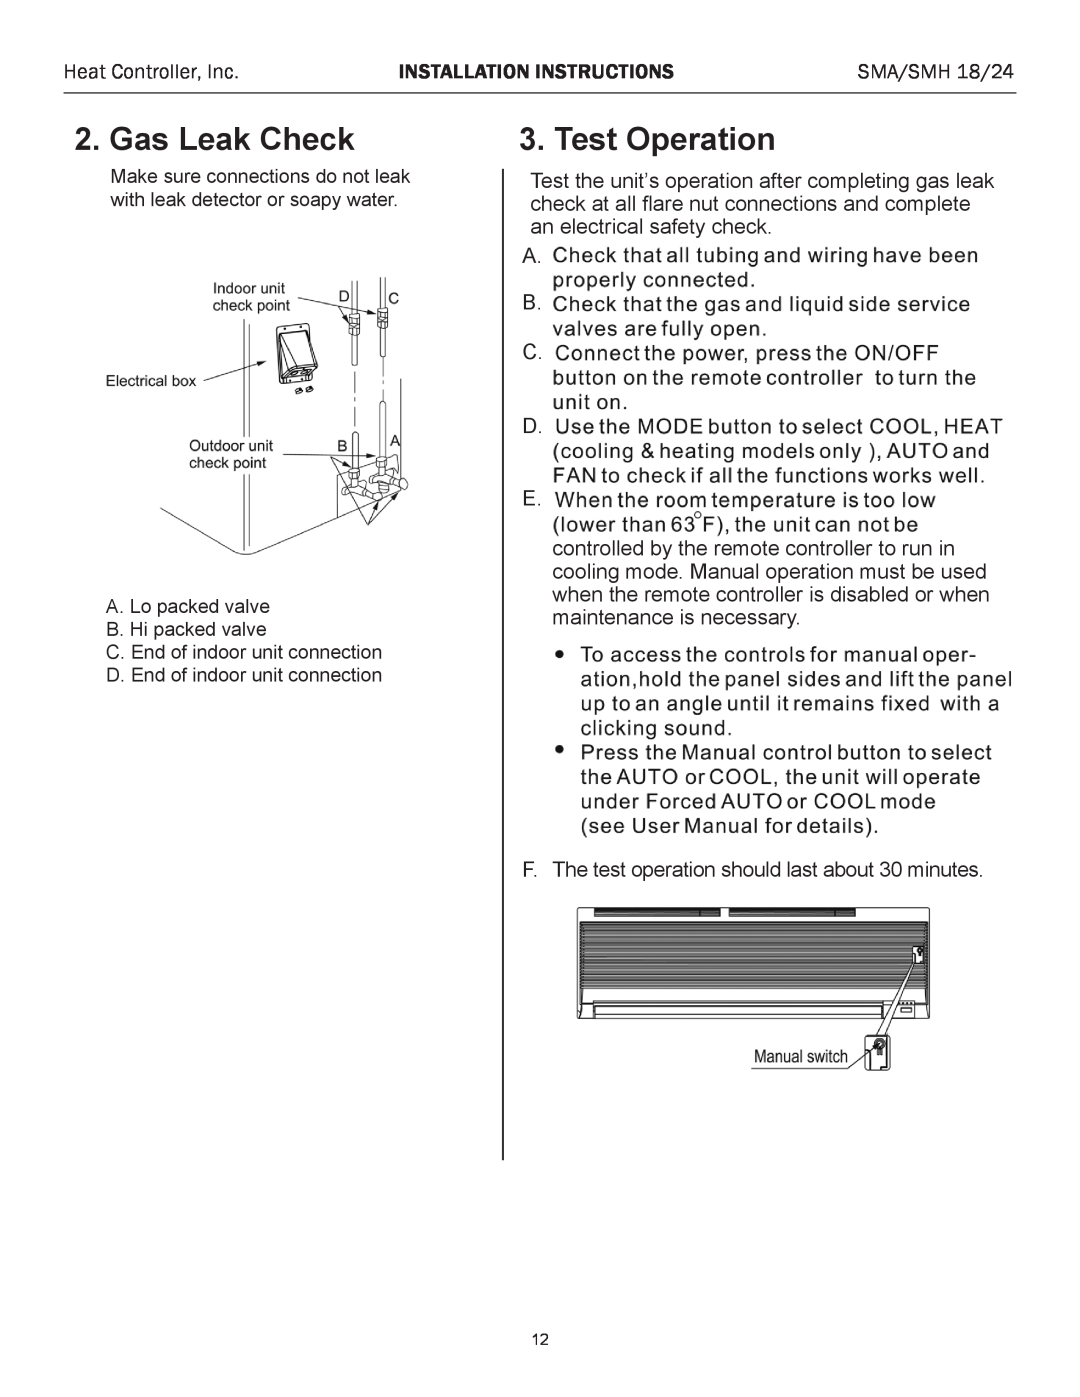 Heat Controller SMA 18 installation instructions Gas Leak Check, Test Operation 